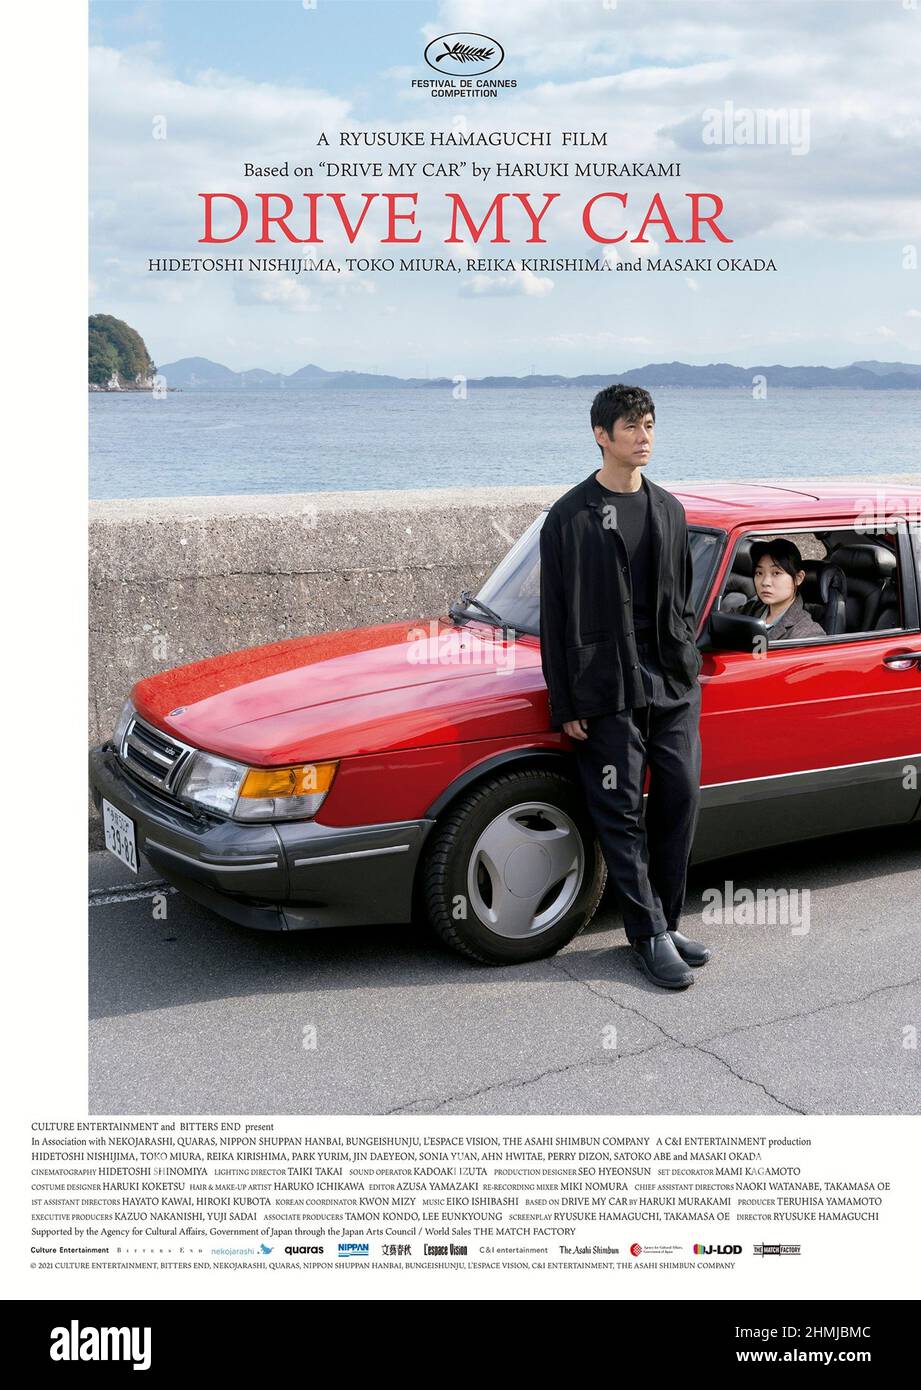 Drive My Car (2021) directed by Ryûsuke Hamaguchi and starring Hidetoshi Nishijima, Tôko Miura and Reika Kirishima. After his wife's unexpected death, Yusuke Kafuku, a renowned stage actor and director, receives an offer to direct a production of Uncle Vanya in Hiroshima. There, he begins to face the haunting mysteries his wife left behind. Stock Photo